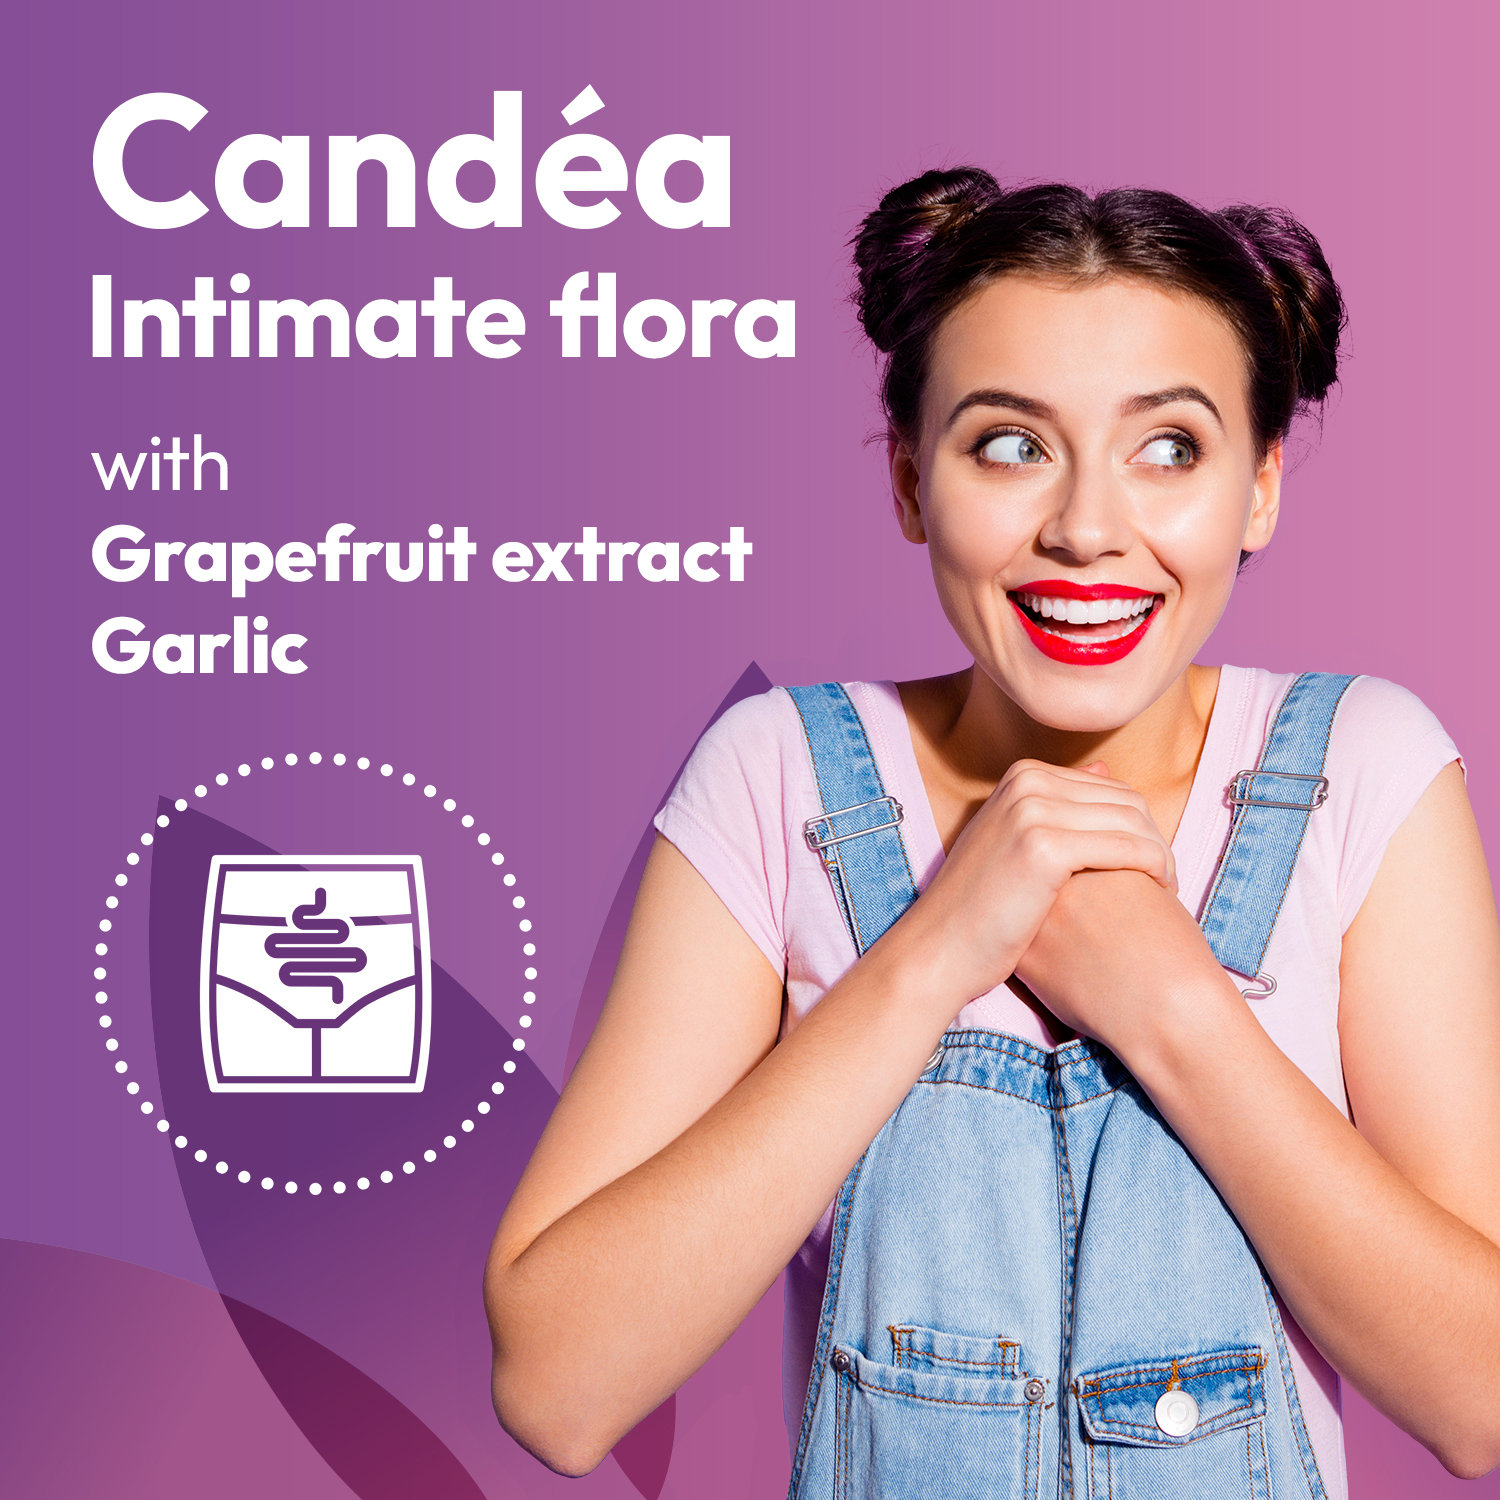 candea intimate flora with grapefruit extract garlic.